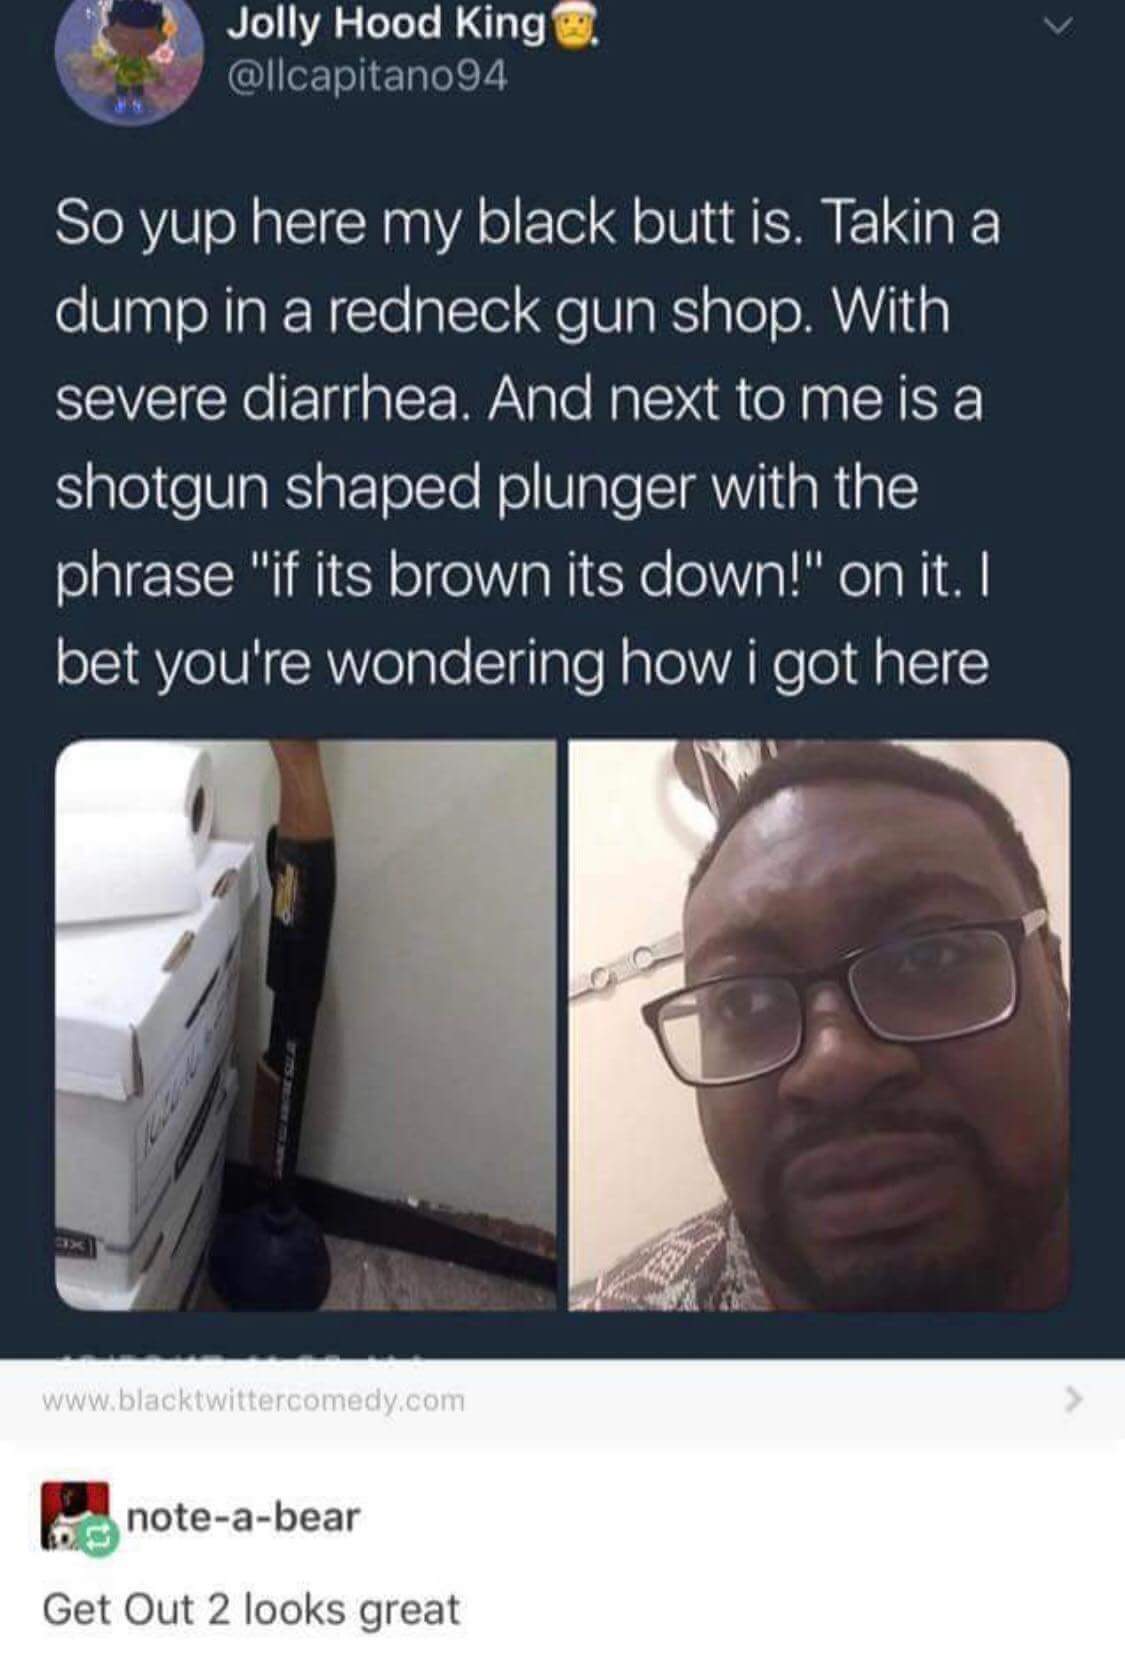 if its brown its down meme - Jolly Hood King e. So yup here my black butt is. Takin a dump in a redneck gun shop. With severe diarrhea. And next to me is a shotgun shaped plunger with the phrase "if its brown its down!" on it. I bet you're wondering how i